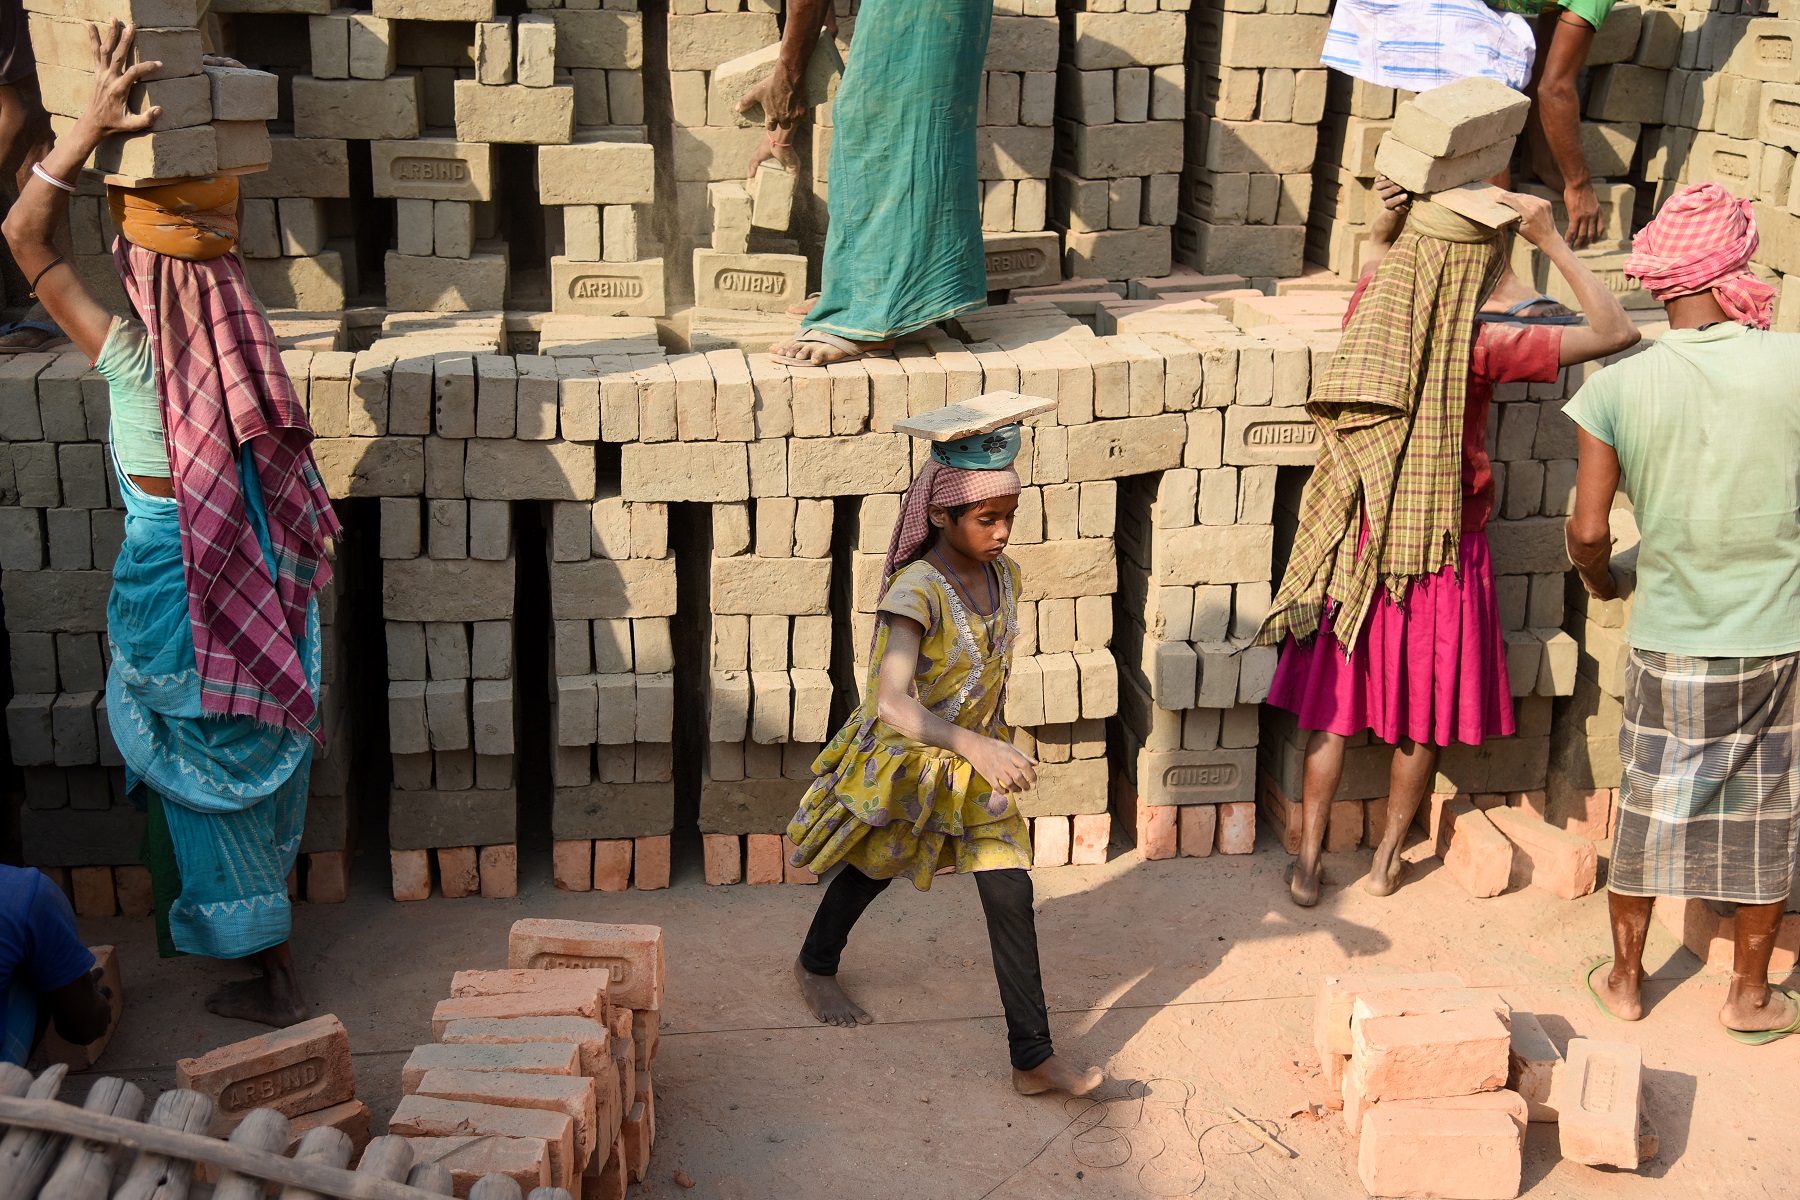 The entire family, comprising husband wife and children, move to the brick kilns and work as one unit for the full season of the operating kiln.